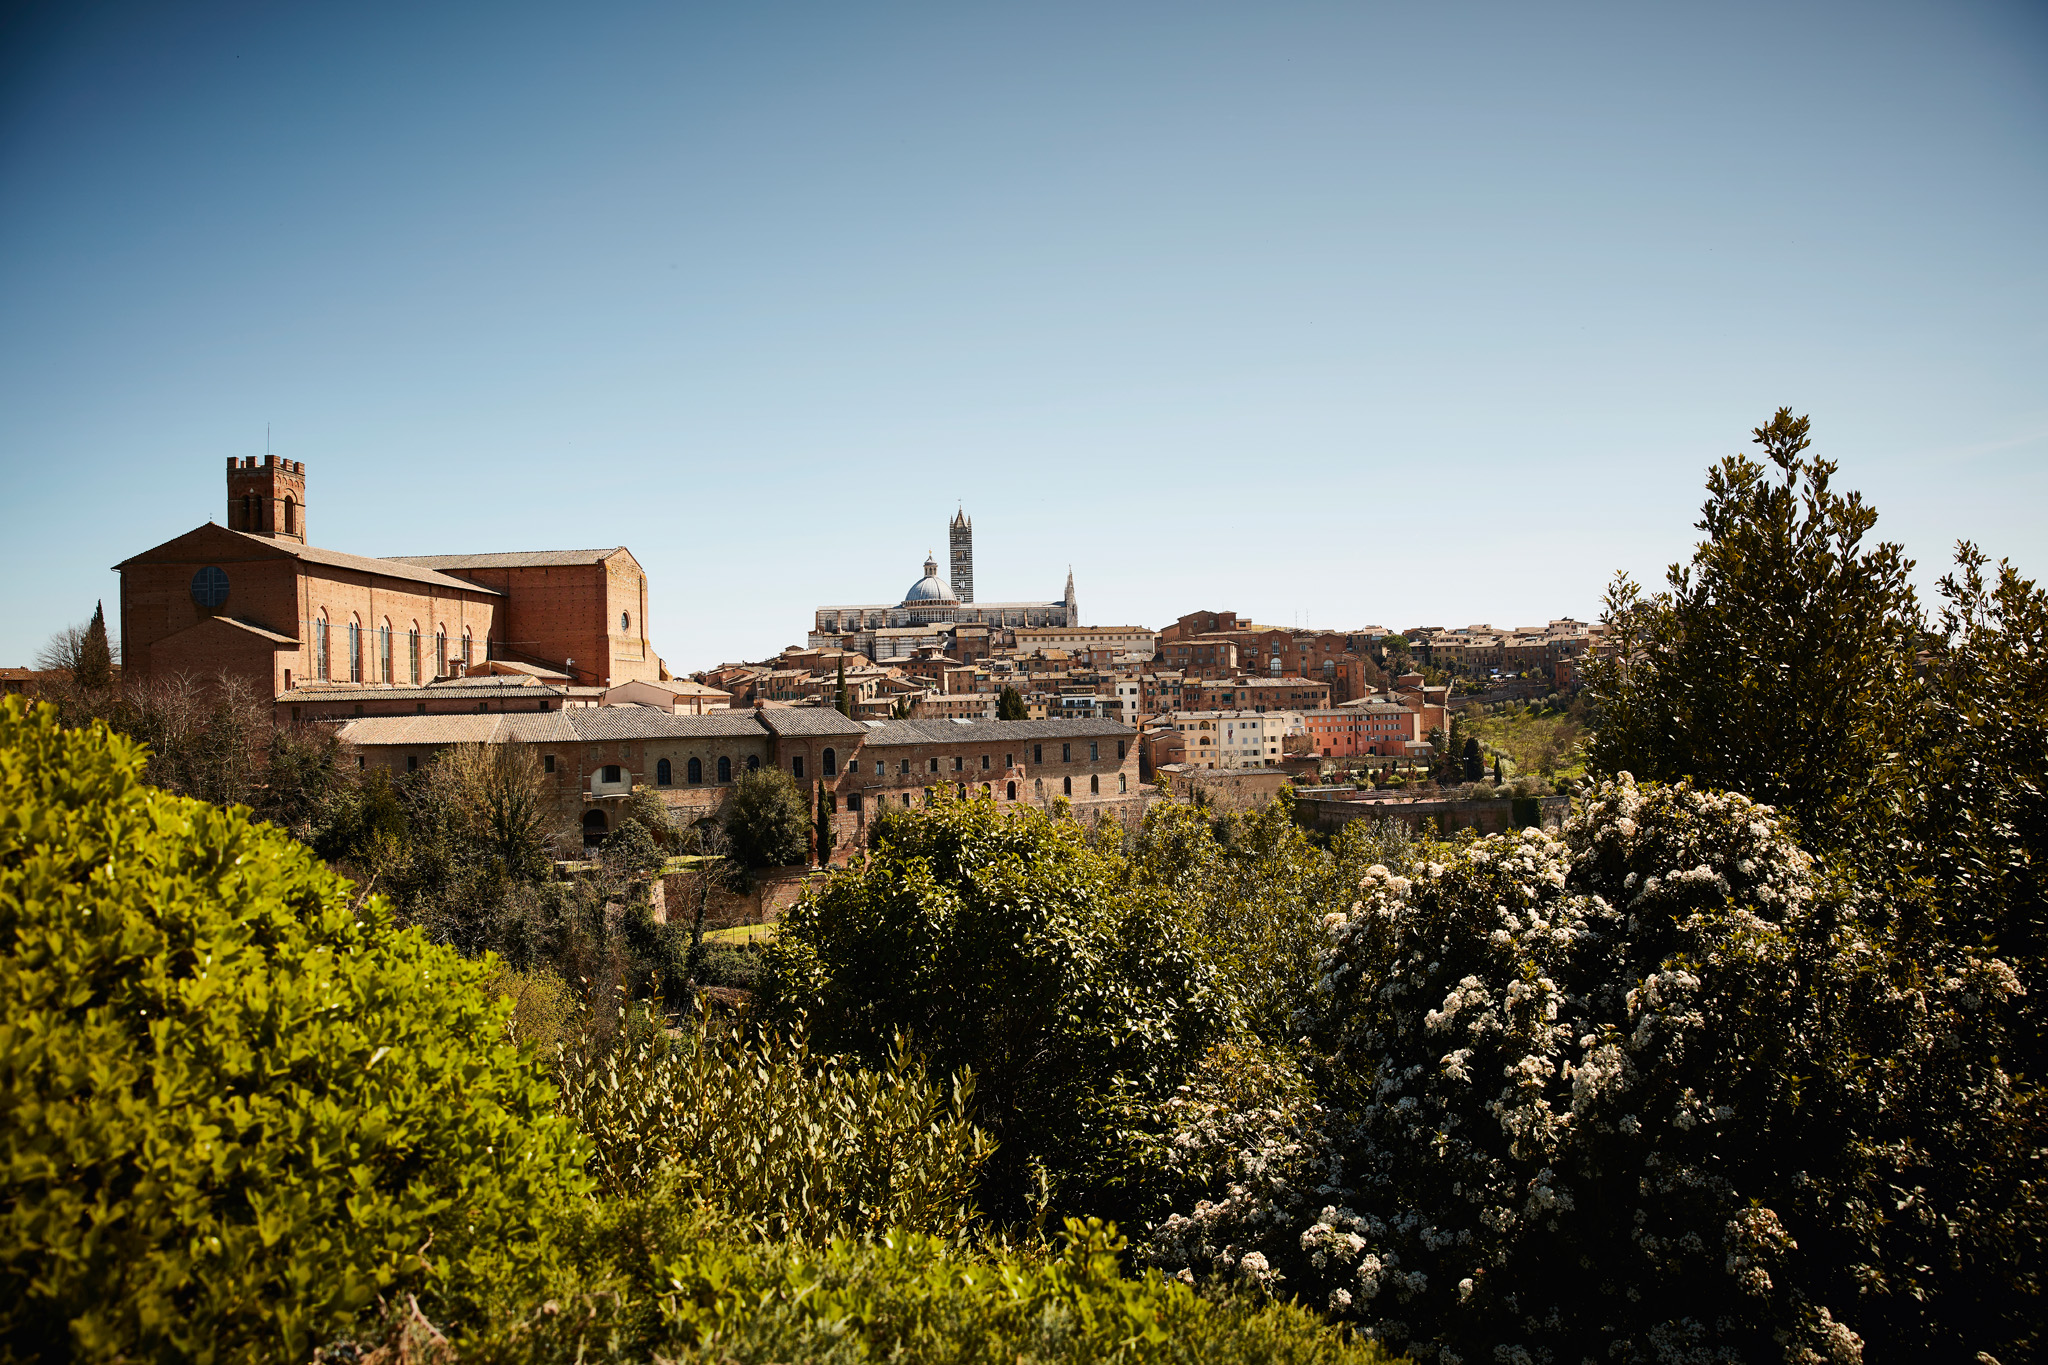 View of the cathedral of Siena